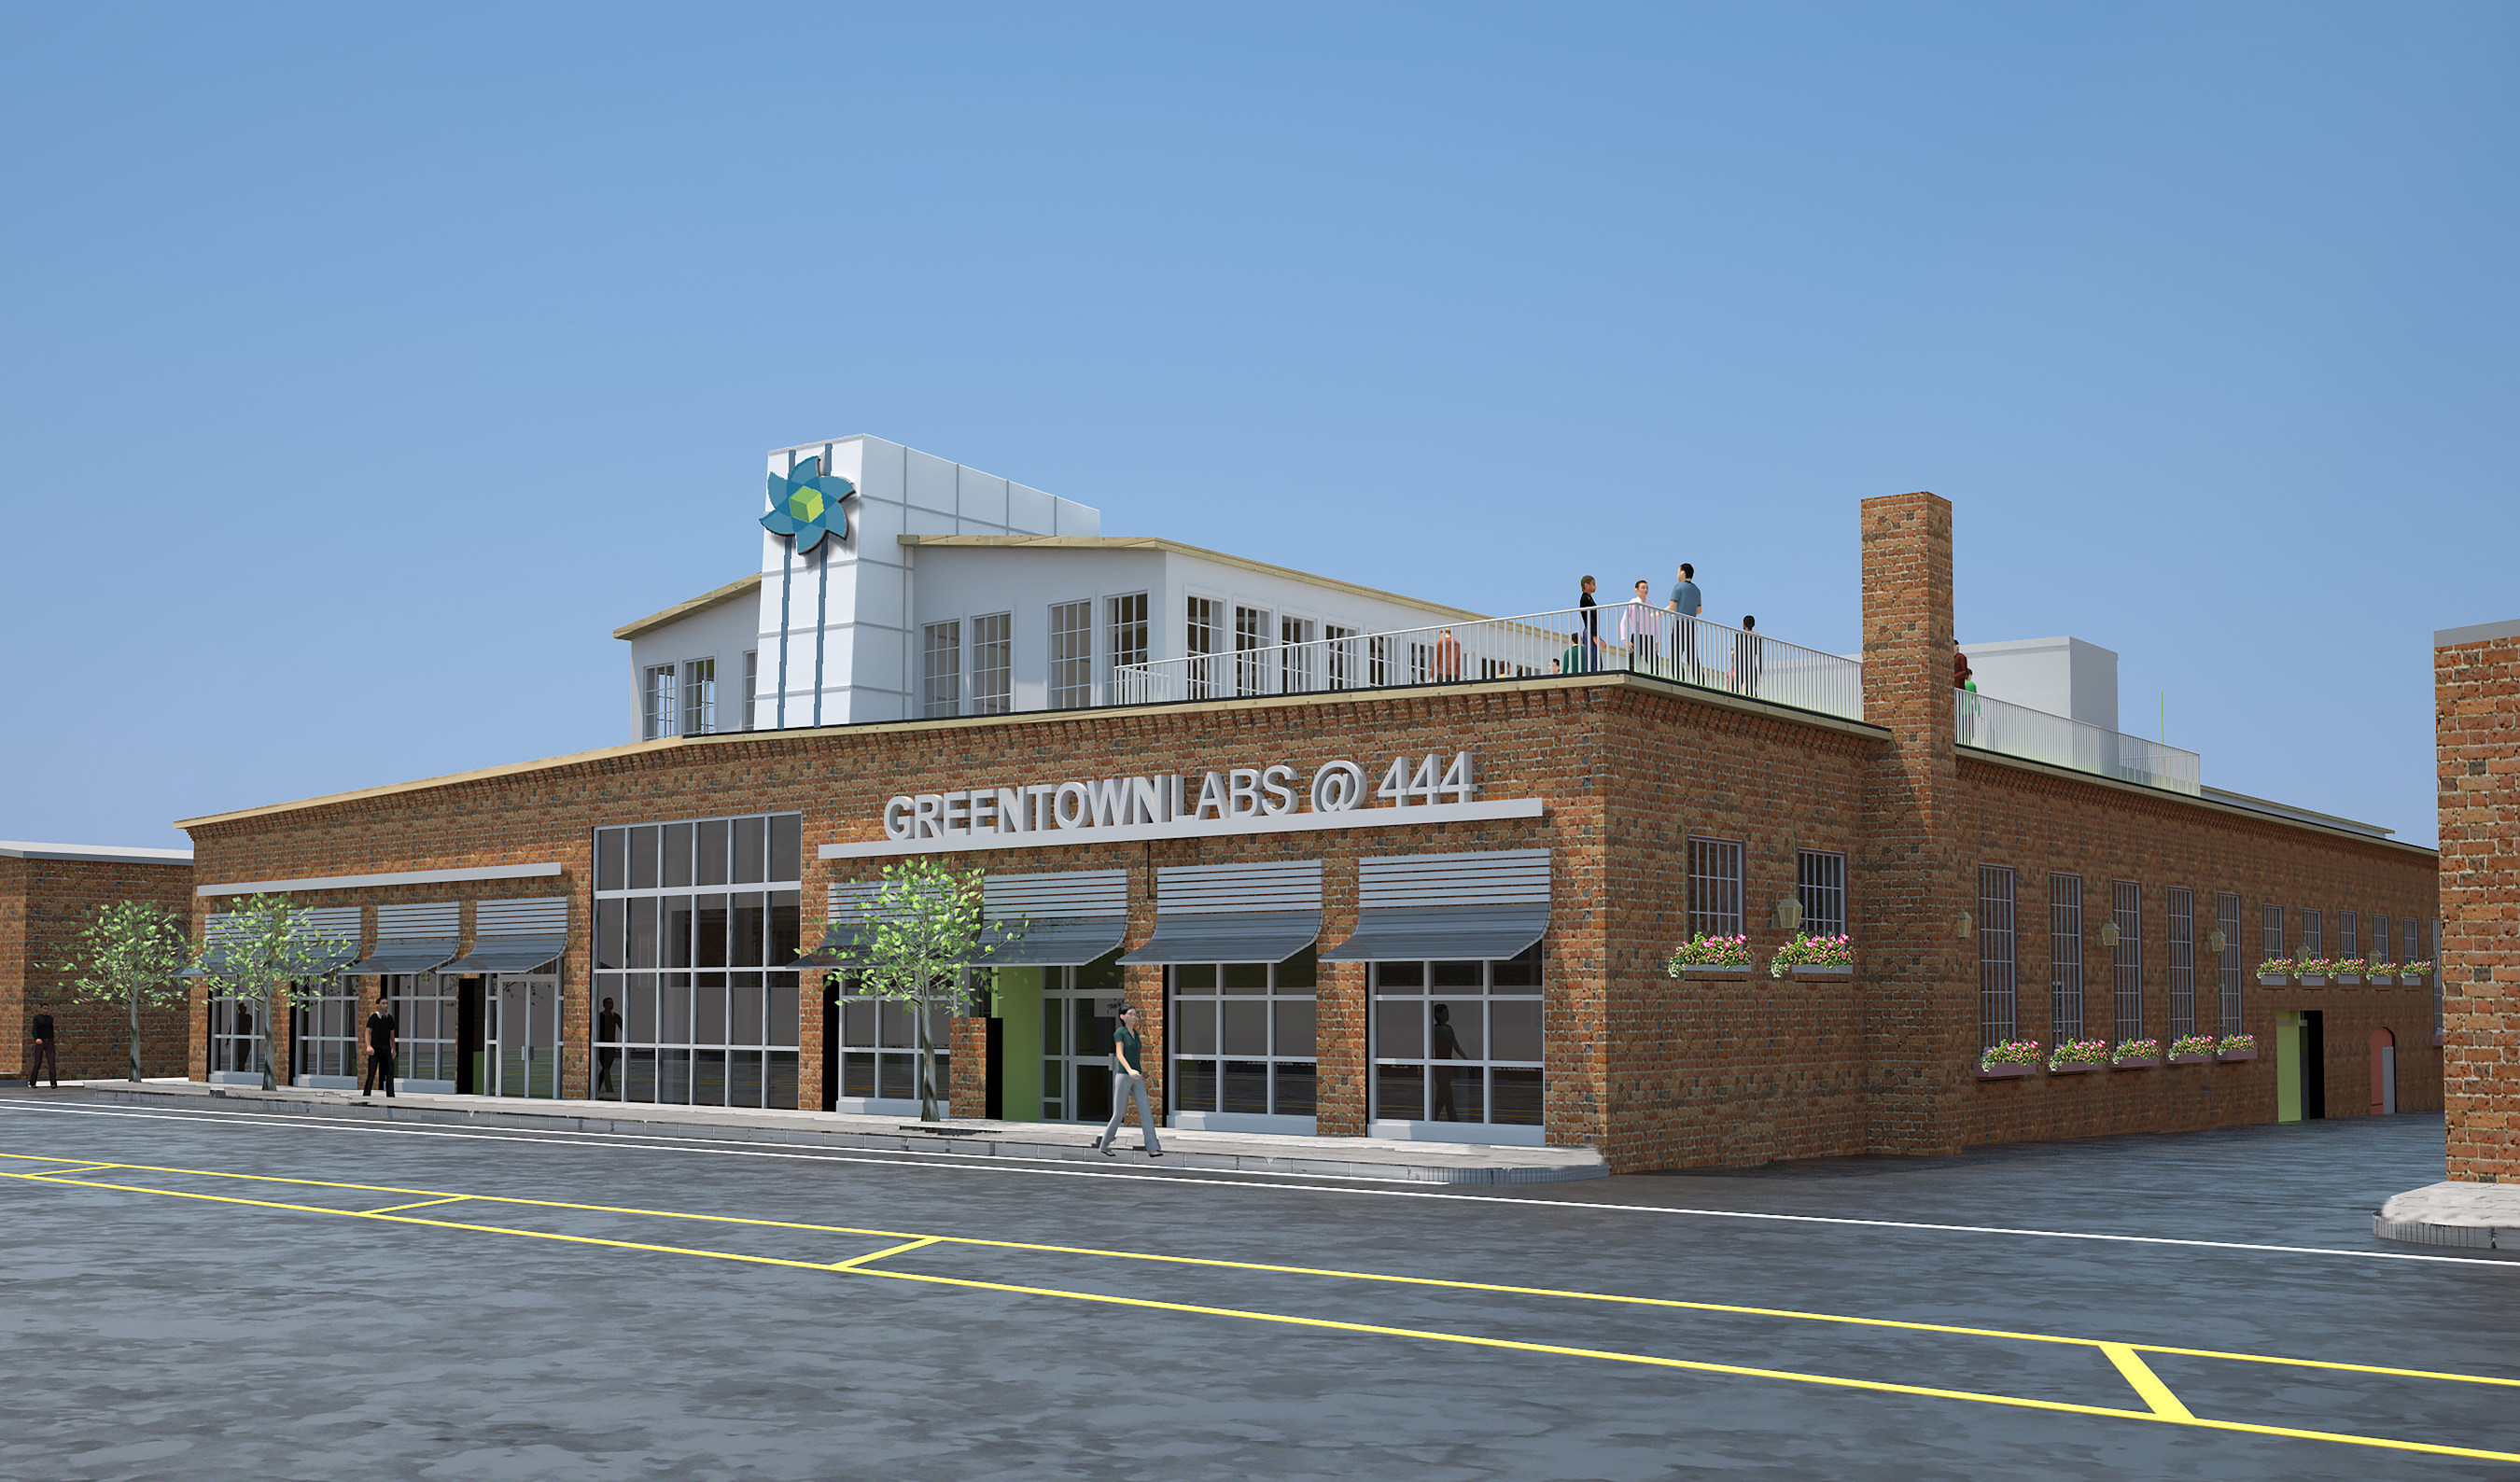 3D-rendered exterior view of the new Greentown Labs headquarters at 444 Somerville Ave., Somerville, Mass. Construction is expected to be completed in late 2016.